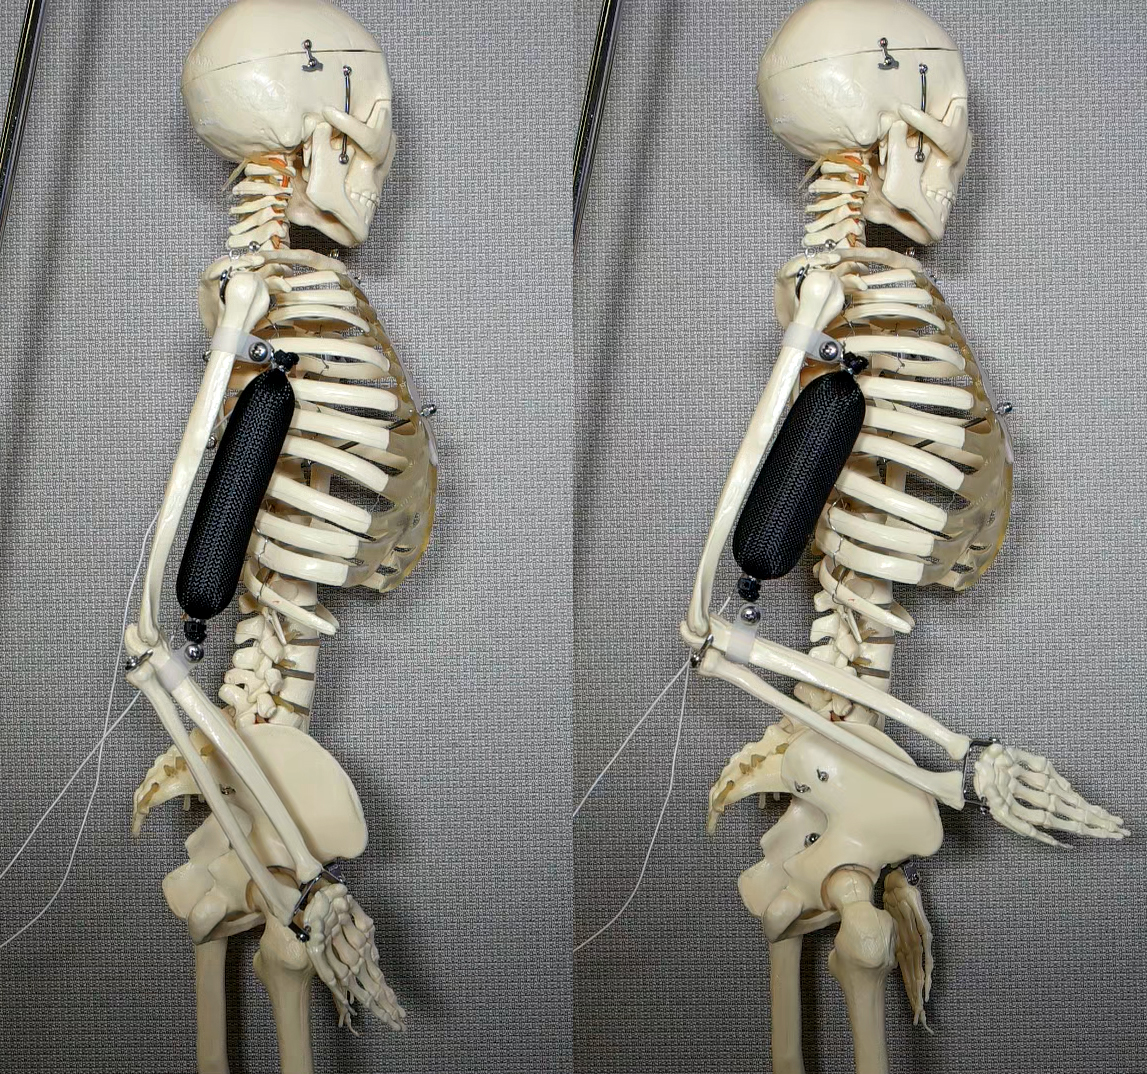 Artificial Muscle Lift Skeleton's Arm